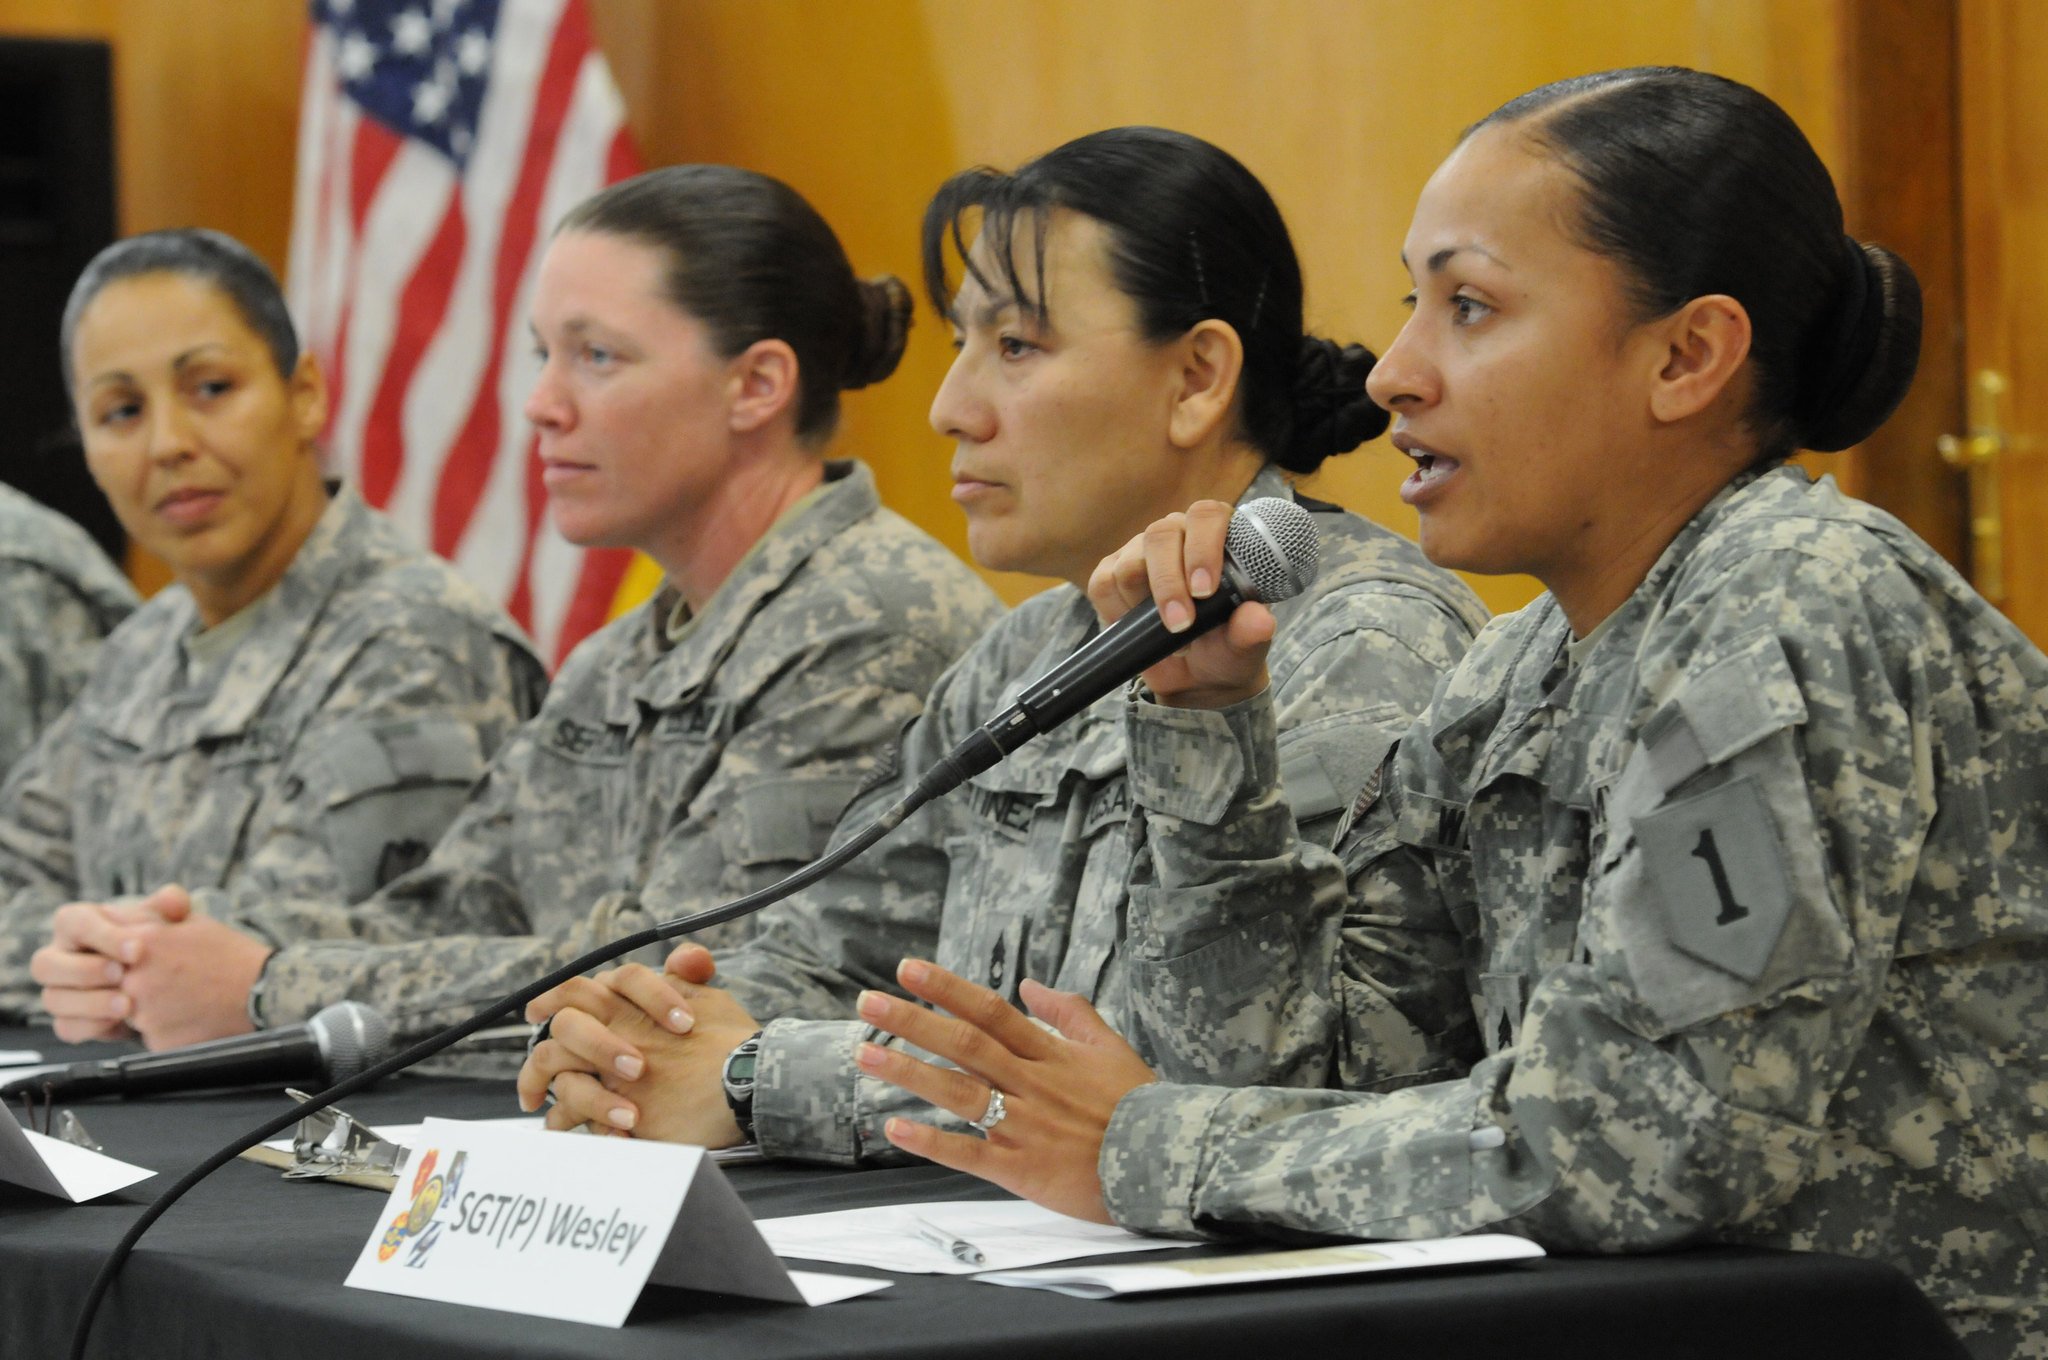 Interactive discussion on the theme of "Women Serving in Combat"